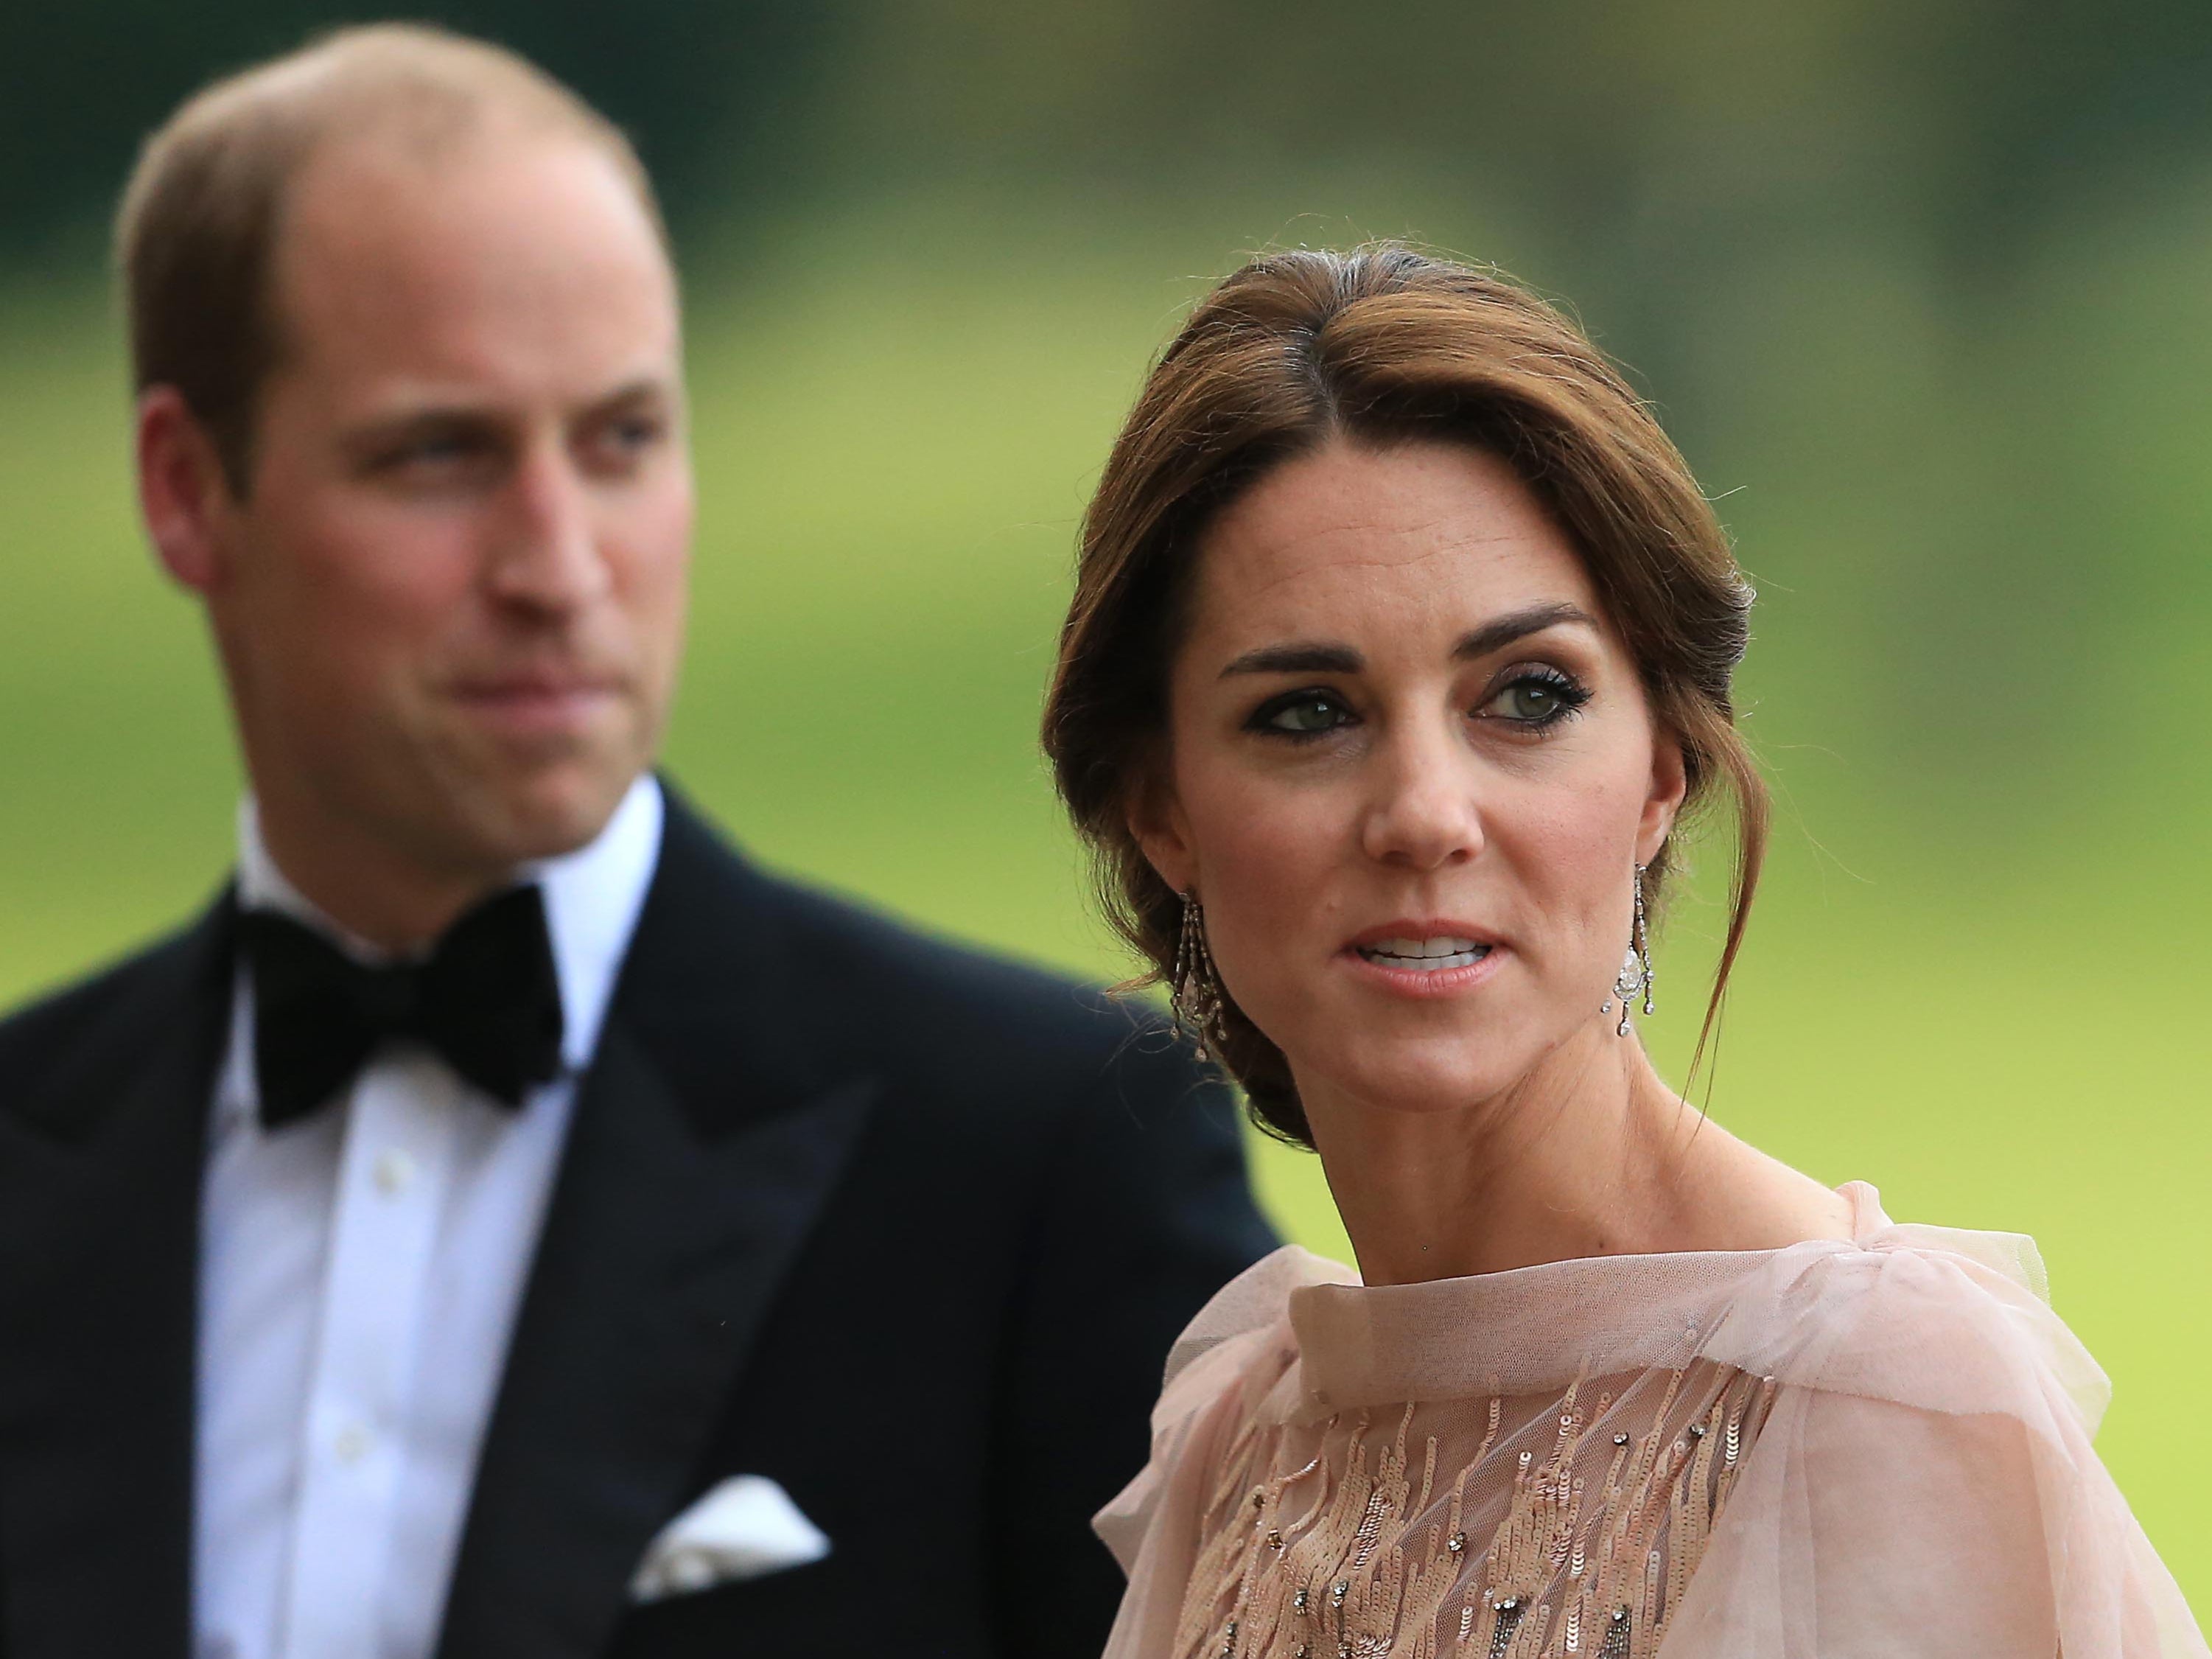 Prince William meeting Kate Middleton will feature in ‘The Crown’ season six